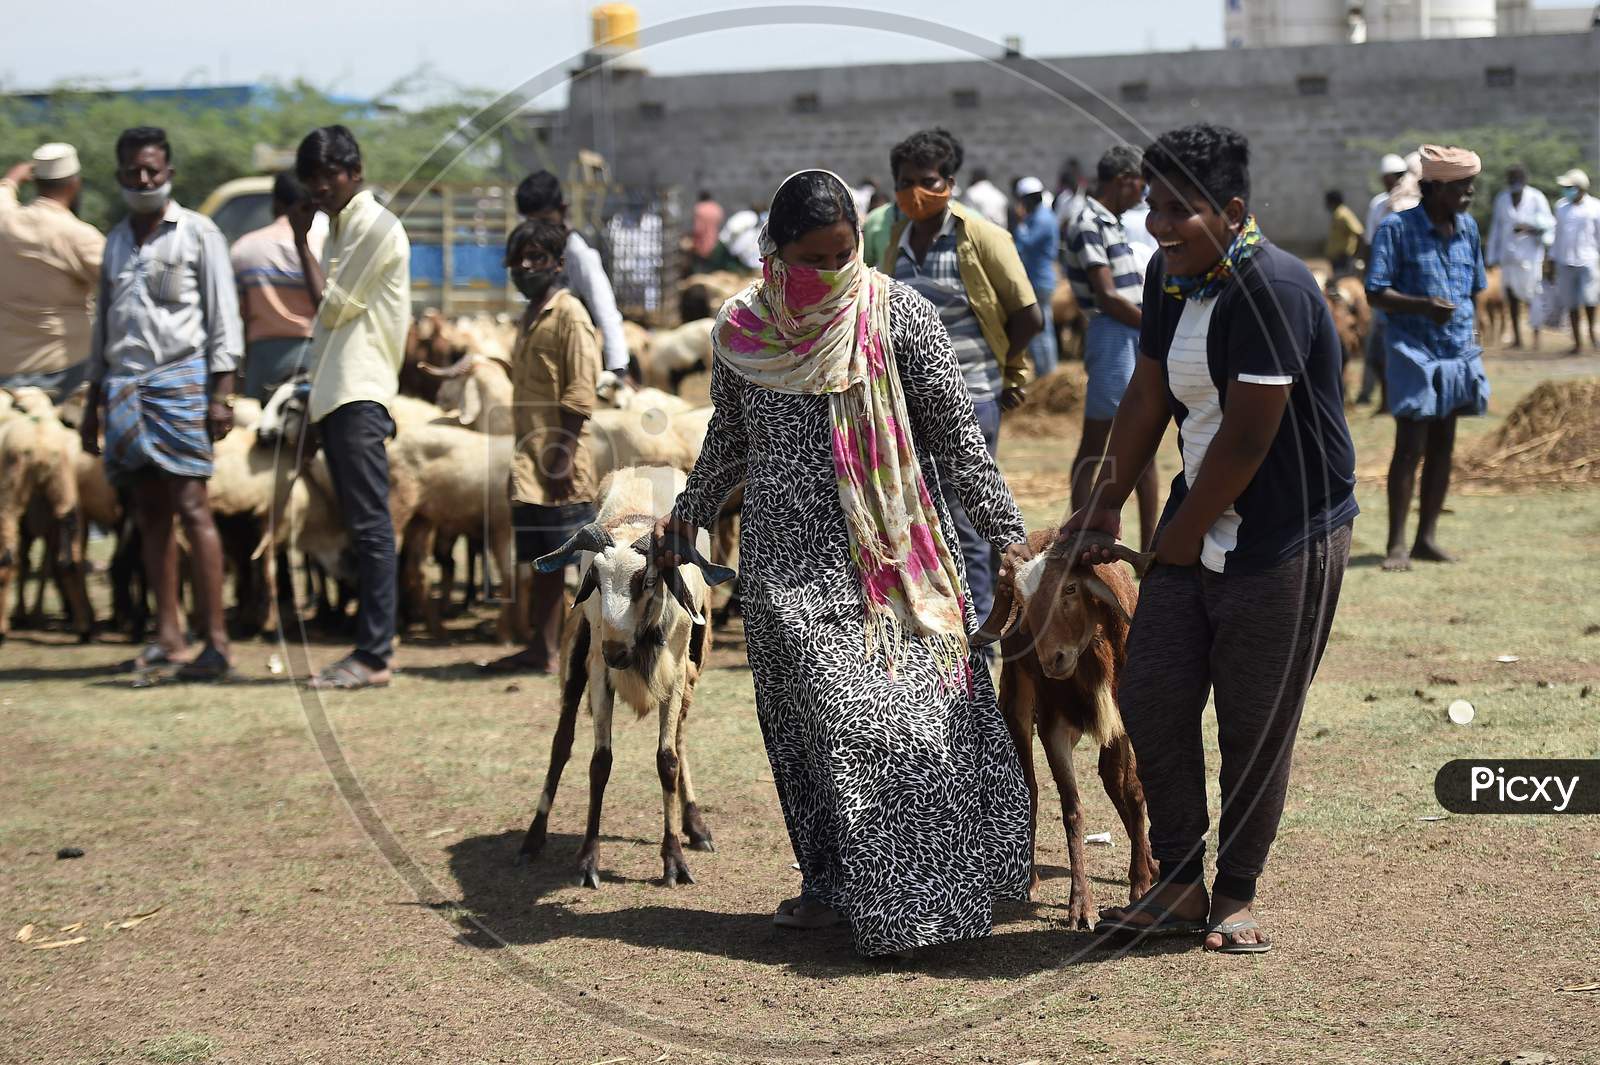 A Buyer Selects His Sacrificial Animal At A Livestock Market Ahead Of Eid Al- Adha, July 3, 2020 in Chennai